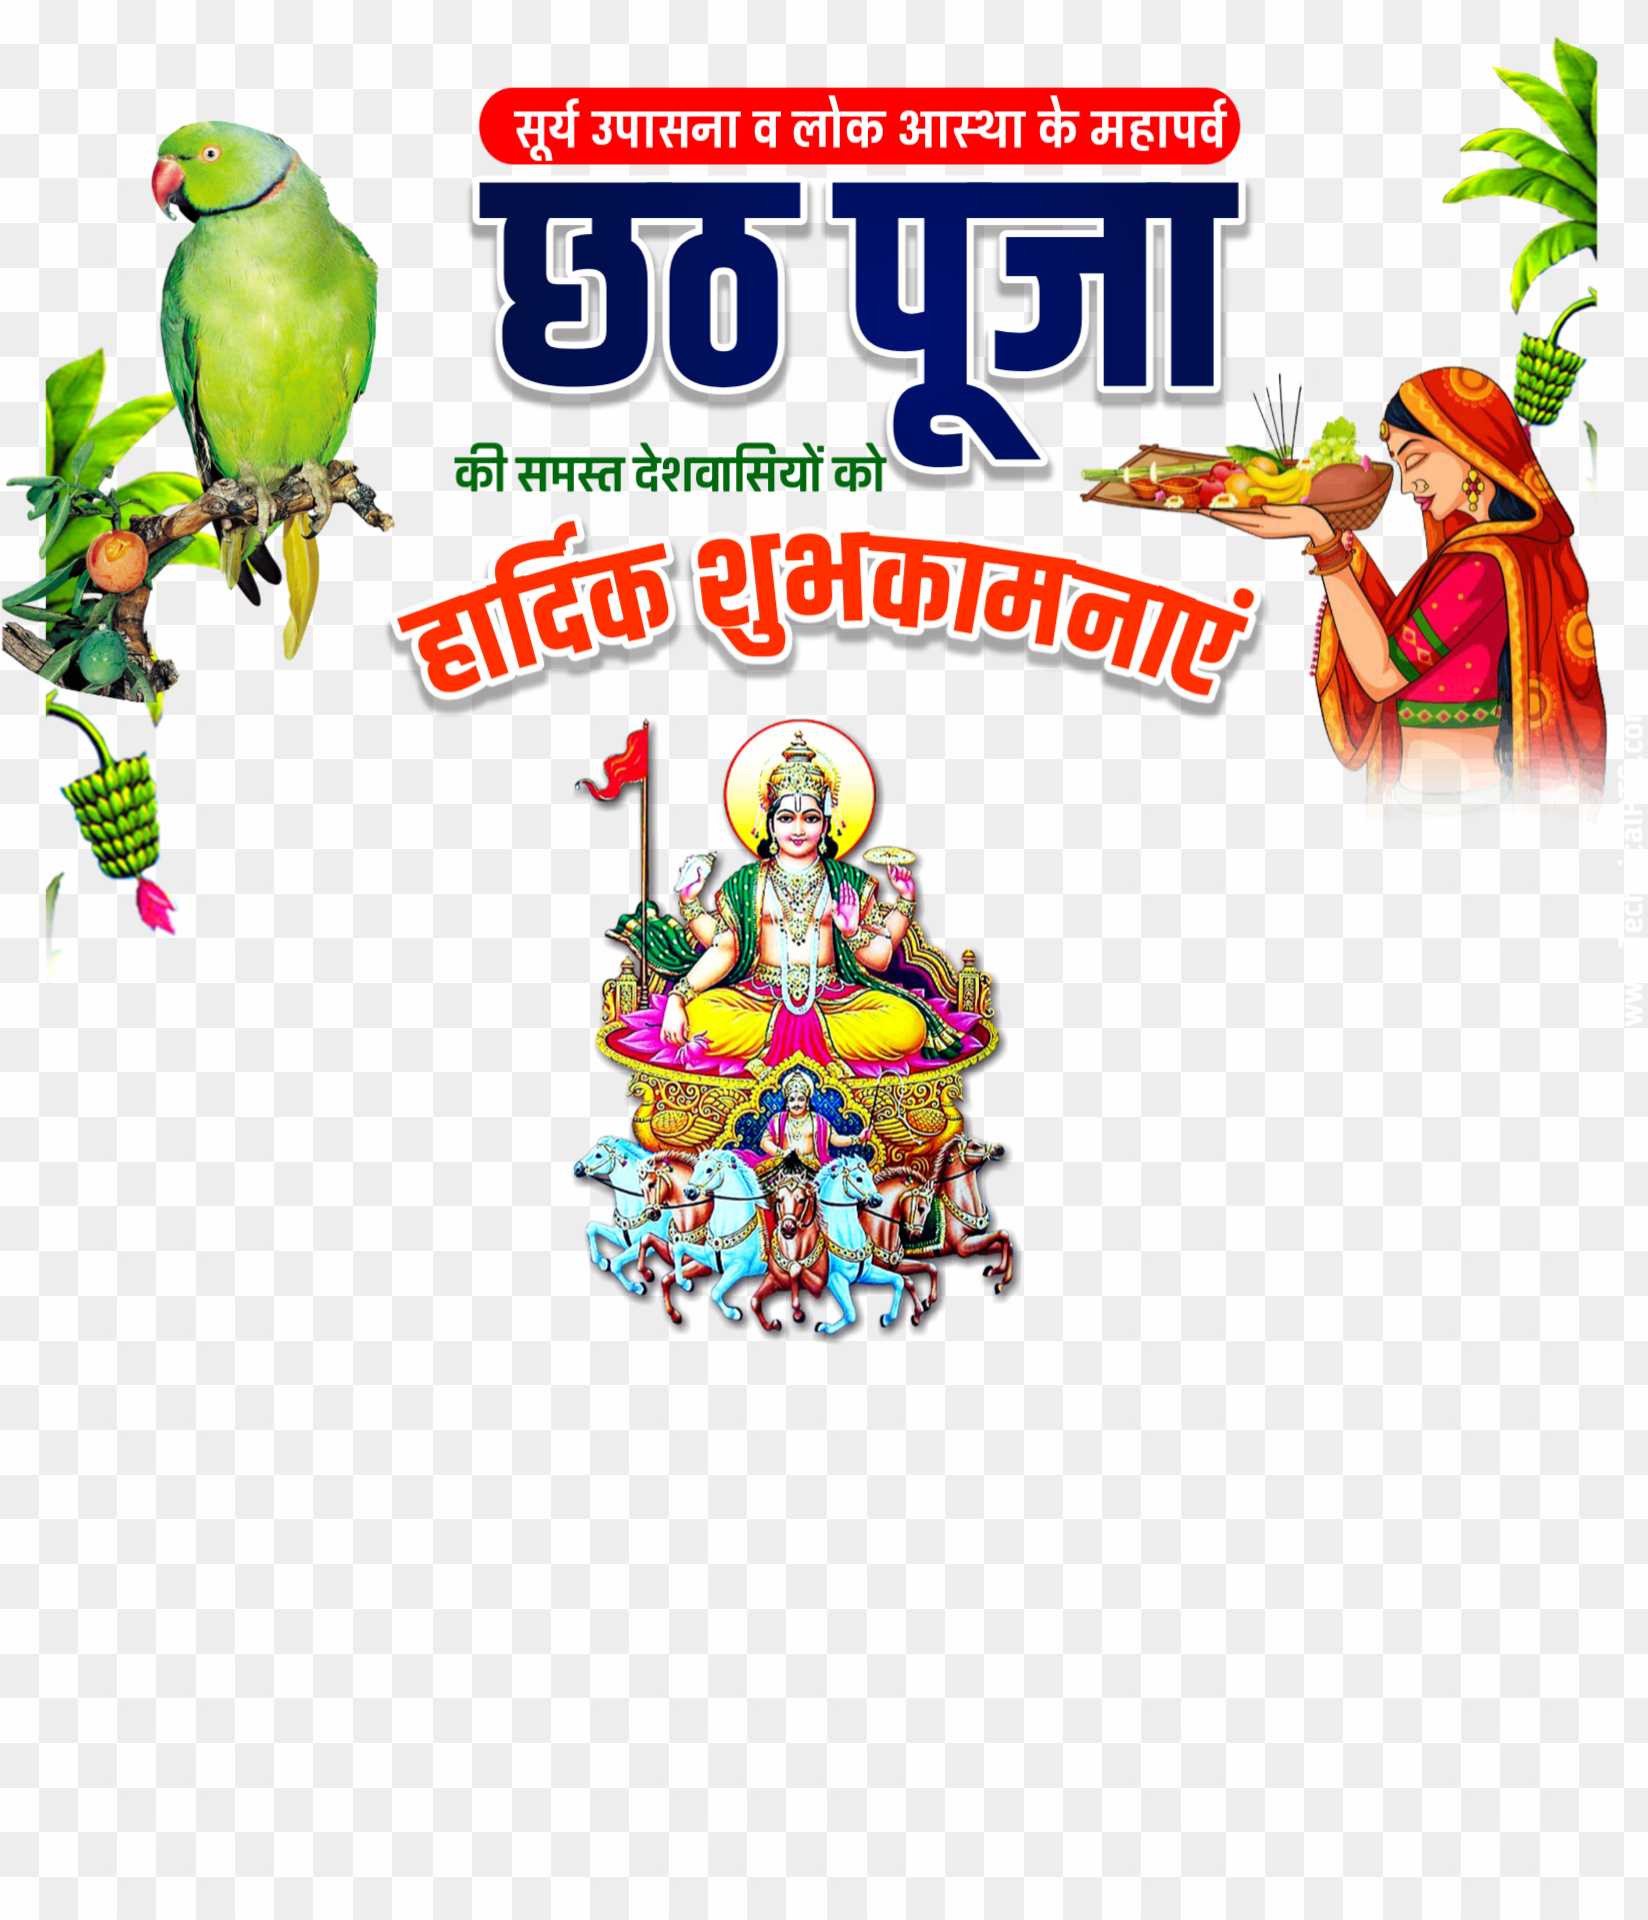 Happy chhath Puja png images 